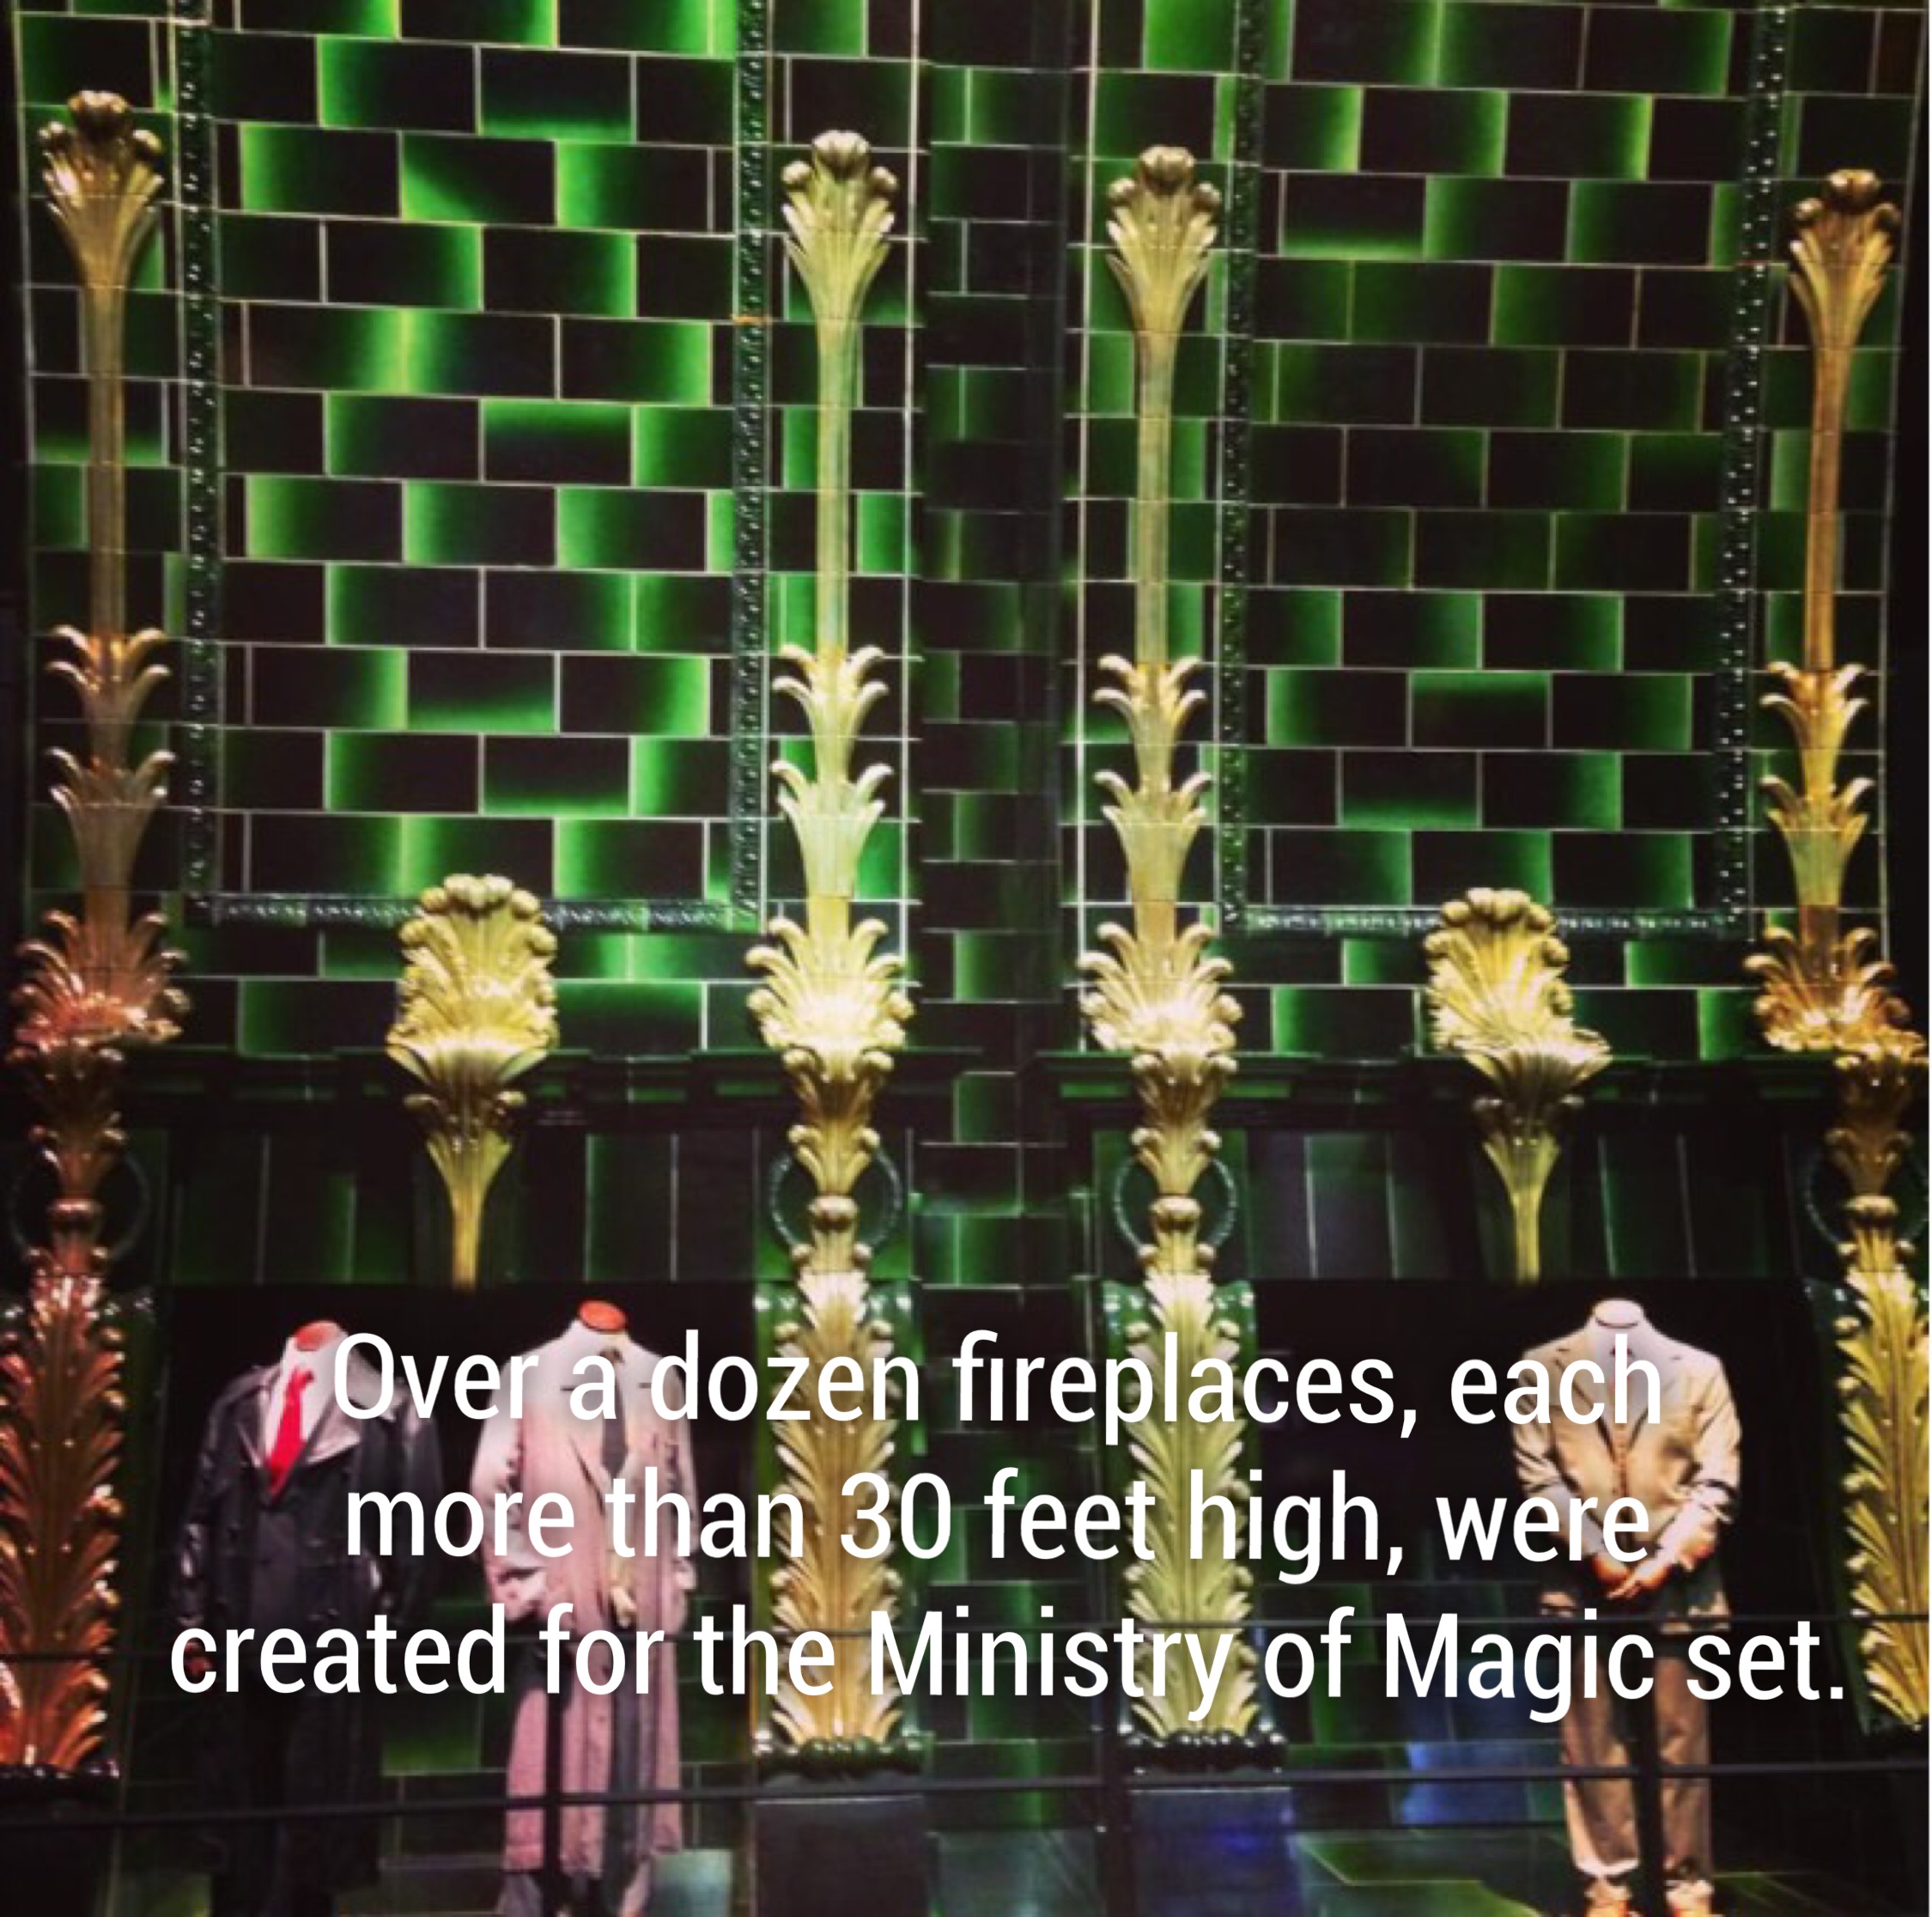 Warner Bros. Studio Tour London - doda hover a dozen fireplaces, each more than 30 feet high, were created for the Ministry of Magic set.